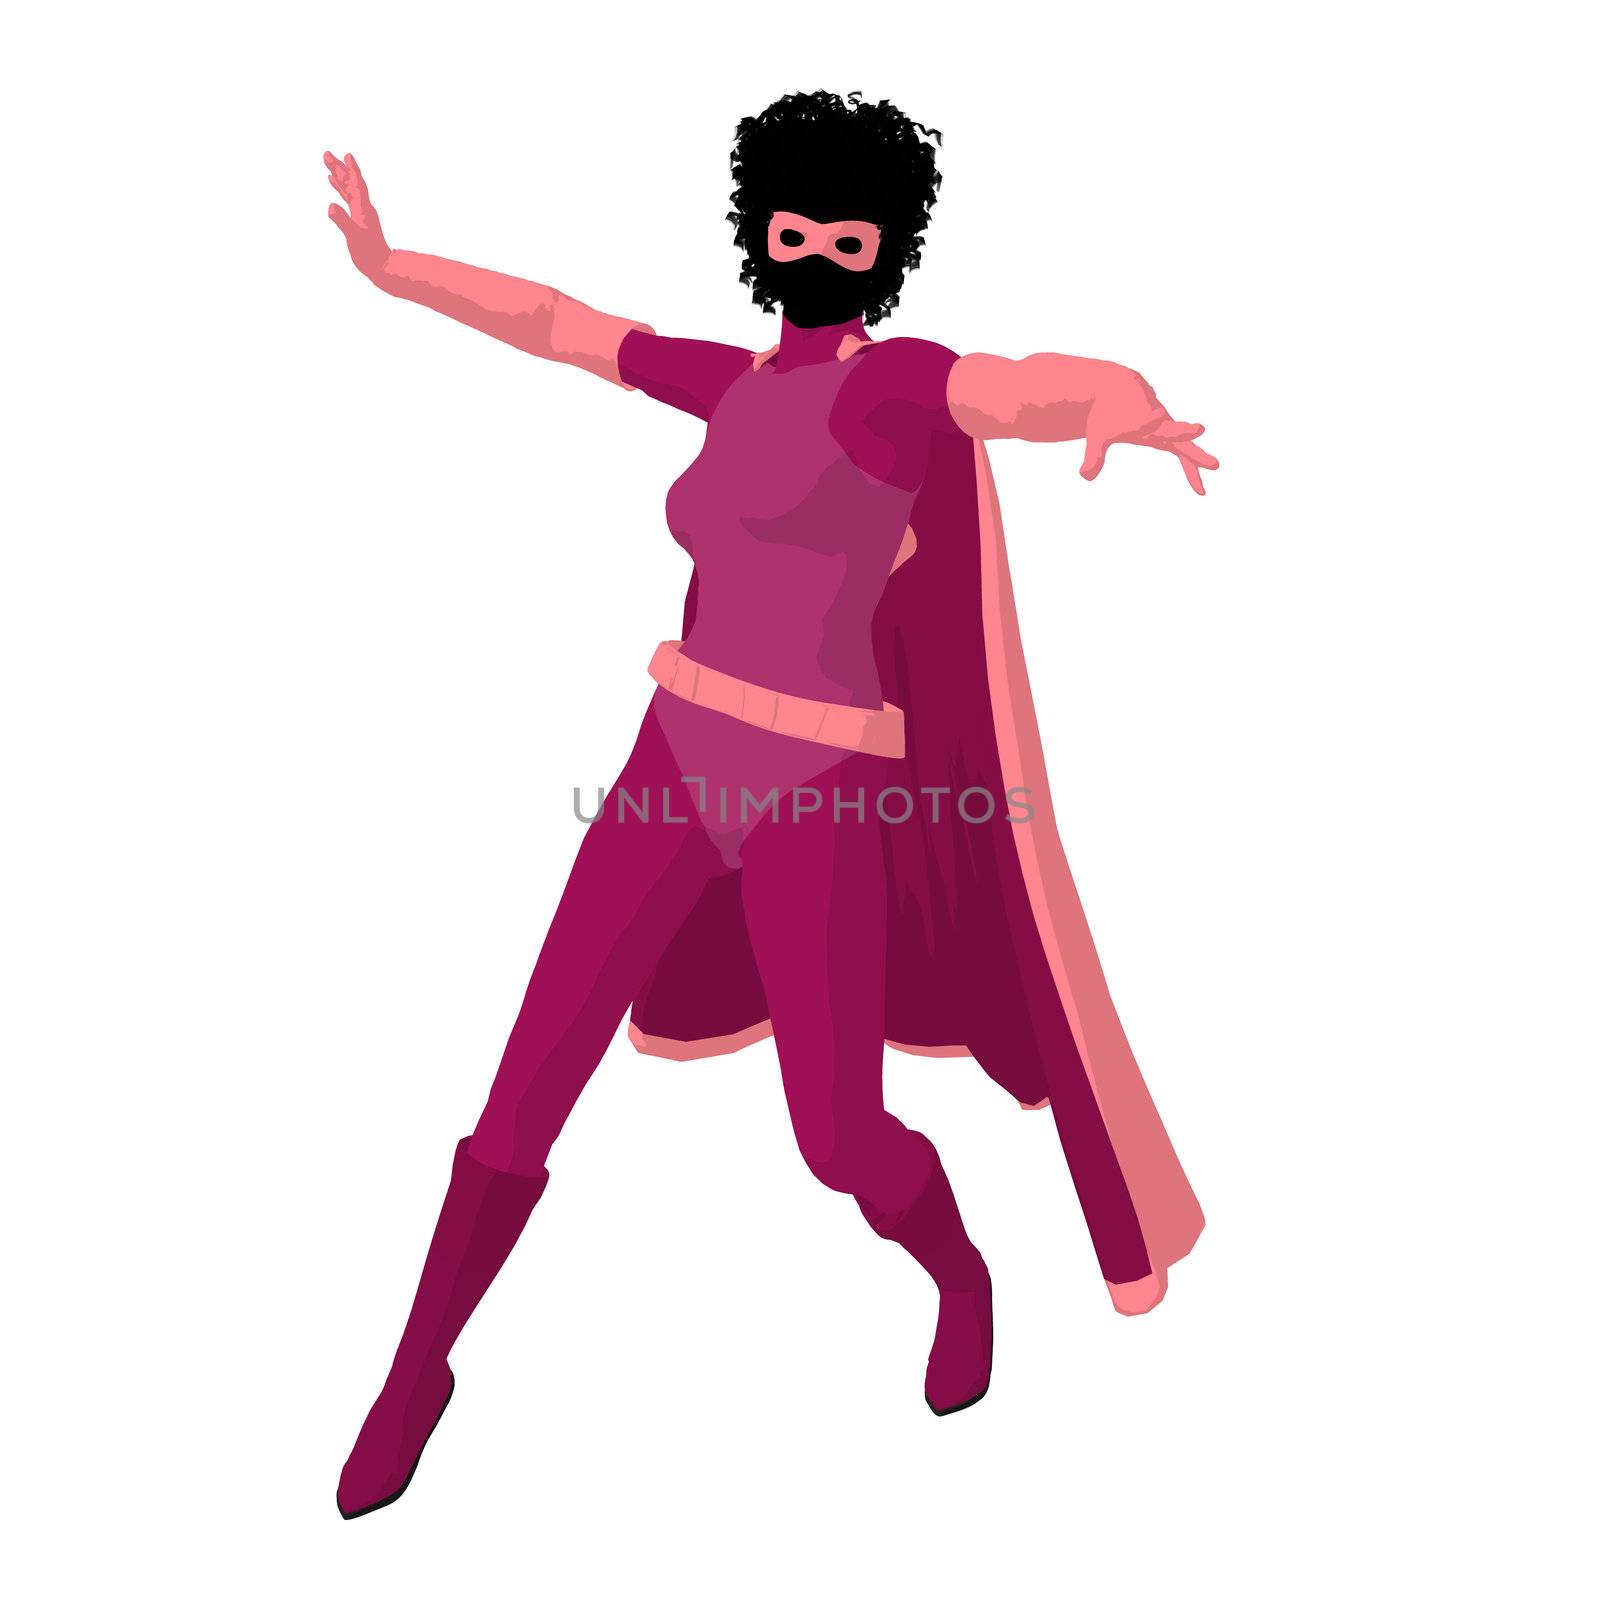 African American Super Heroine Illustration Silhouette by kathygold